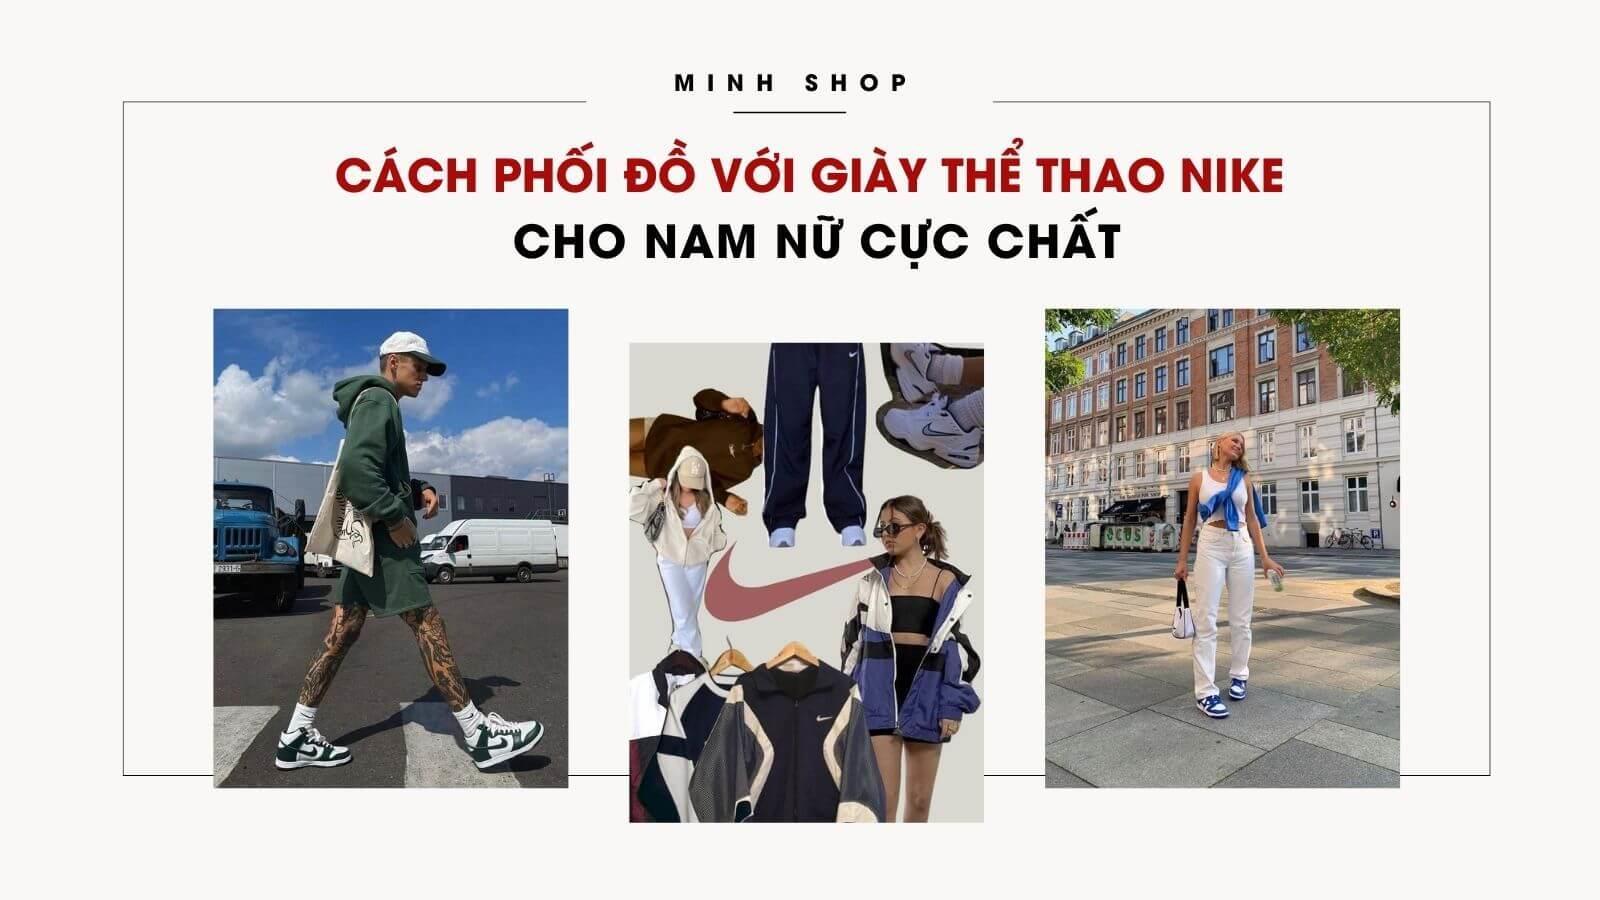 cach-phoi-do-voi-giay-the-thao-nike-cho-nam-nu-cuc-chat